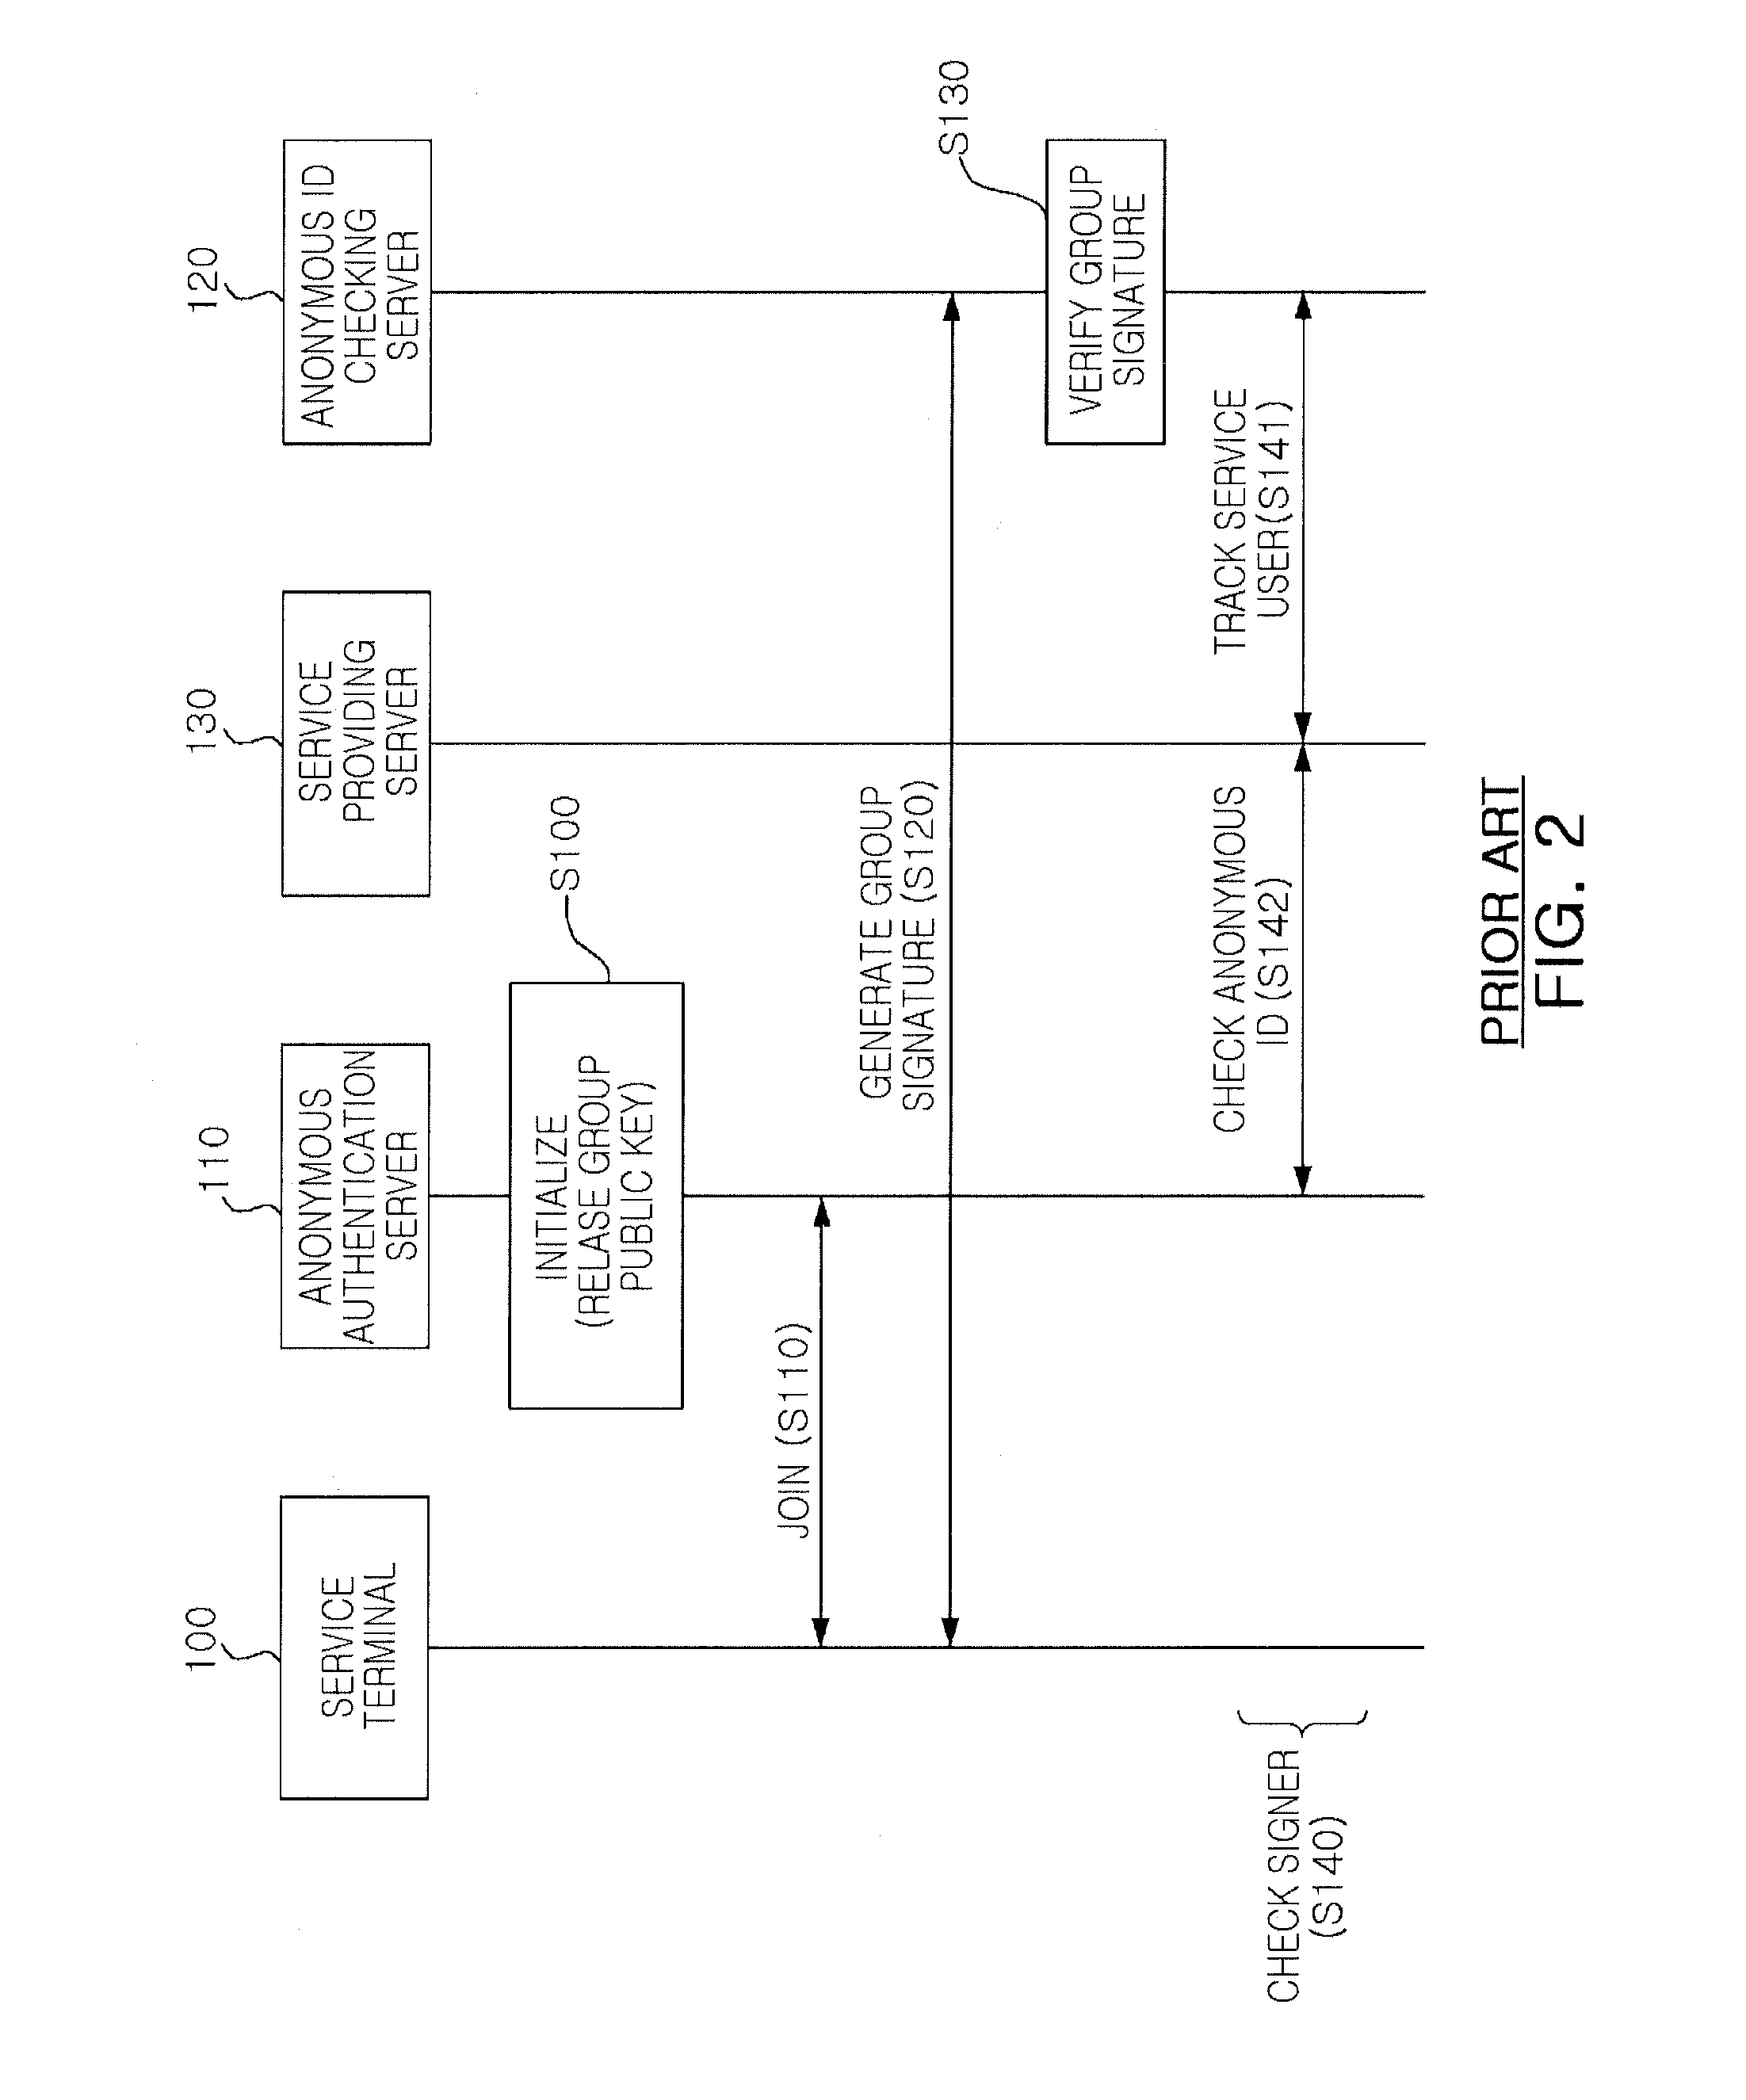 Anonymous authentication service method for providing local linkability